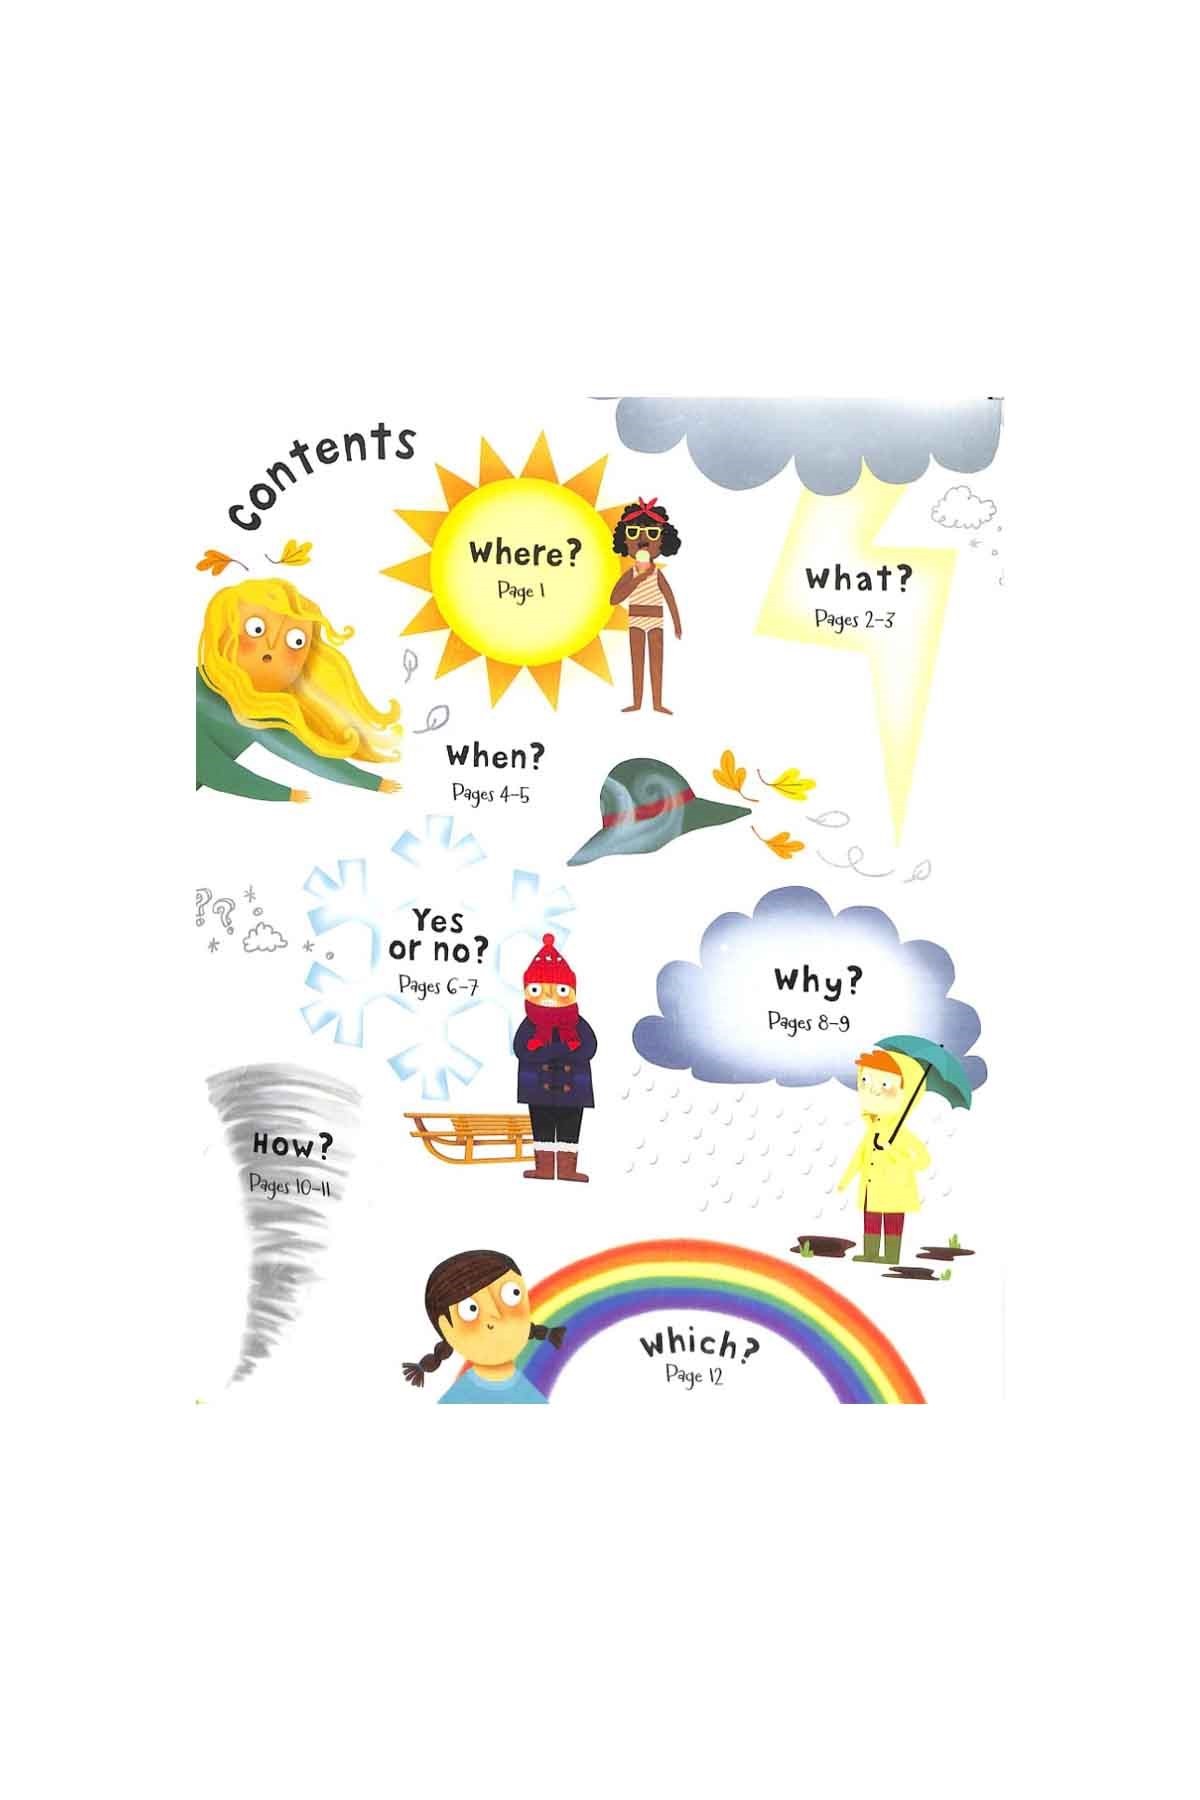 The Usborne Lift-The-Flap Questions And Answers About Weather